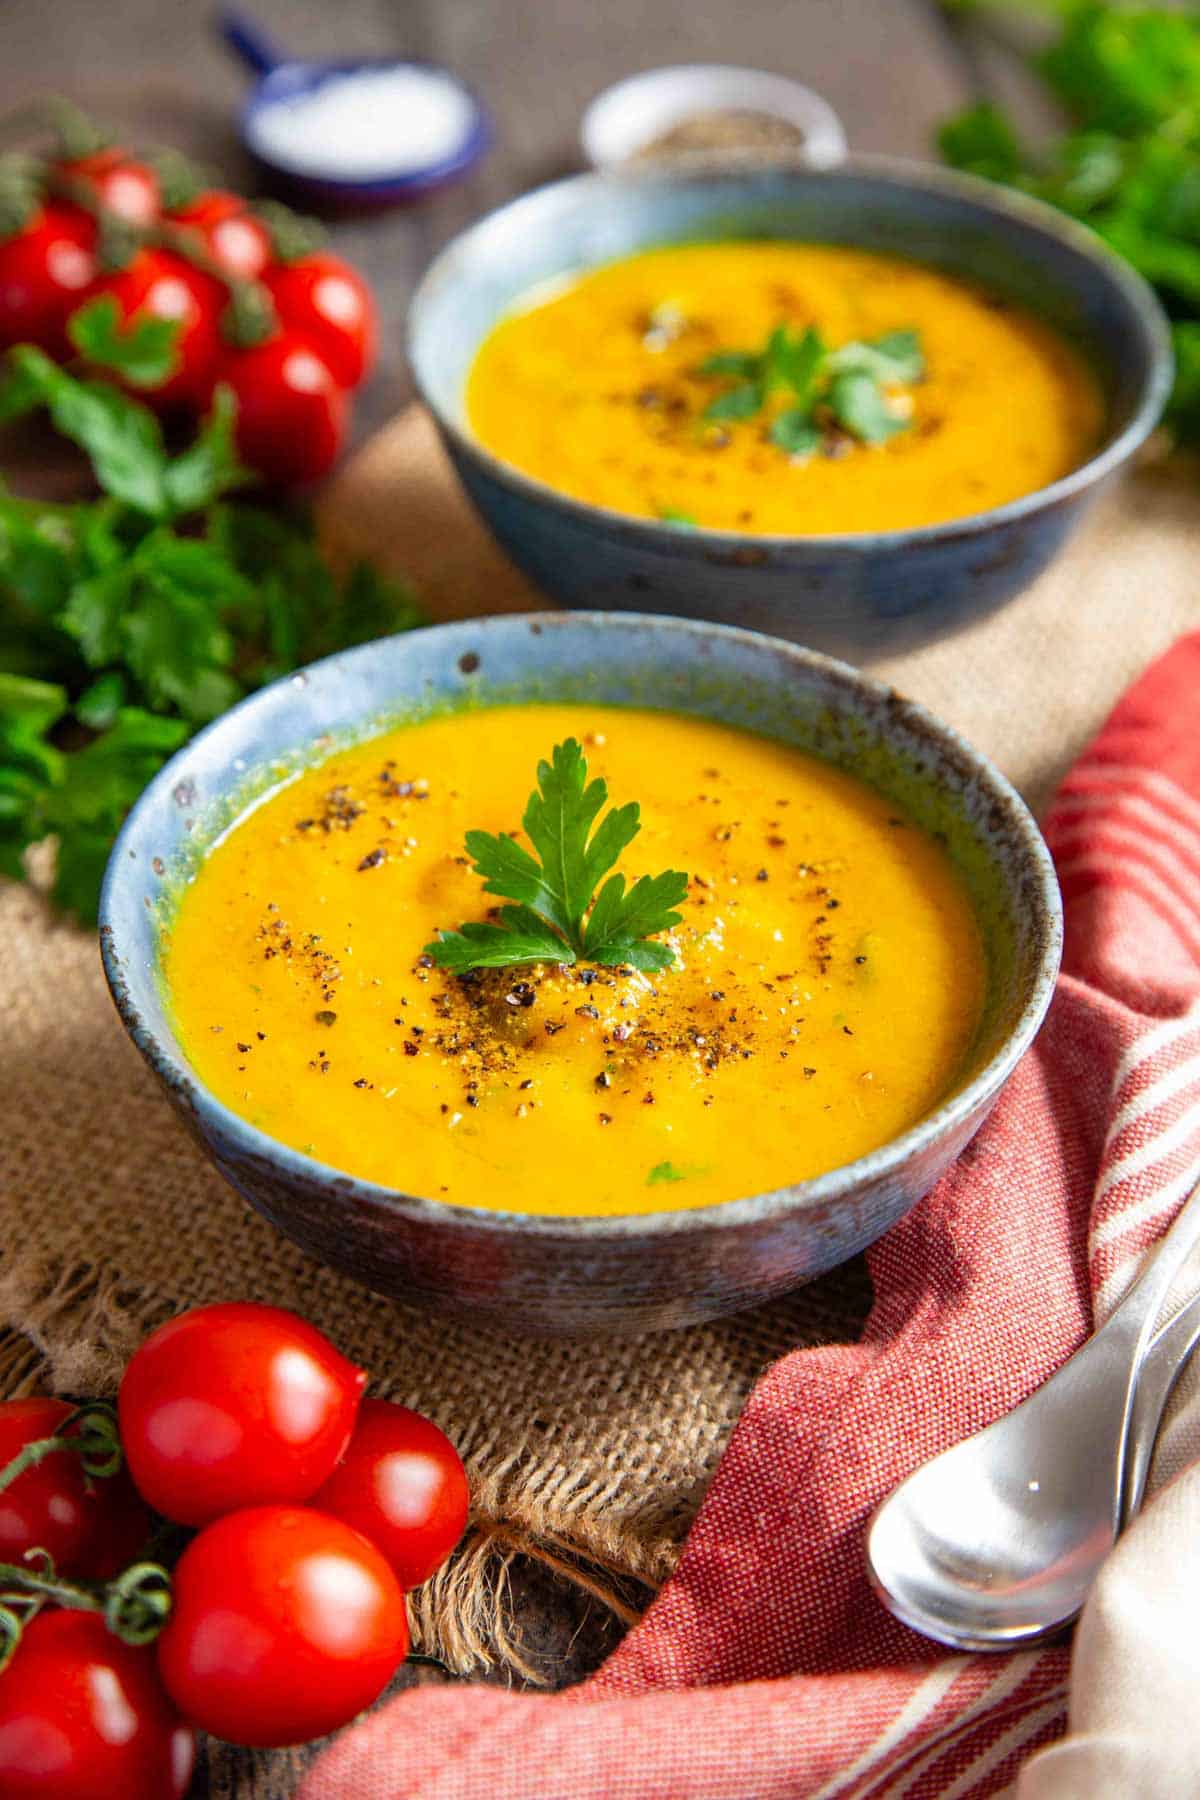 Thick, golden carrot and swede soup in earthenware bowls on a table surrounded by cherry tomatoes and parsley.